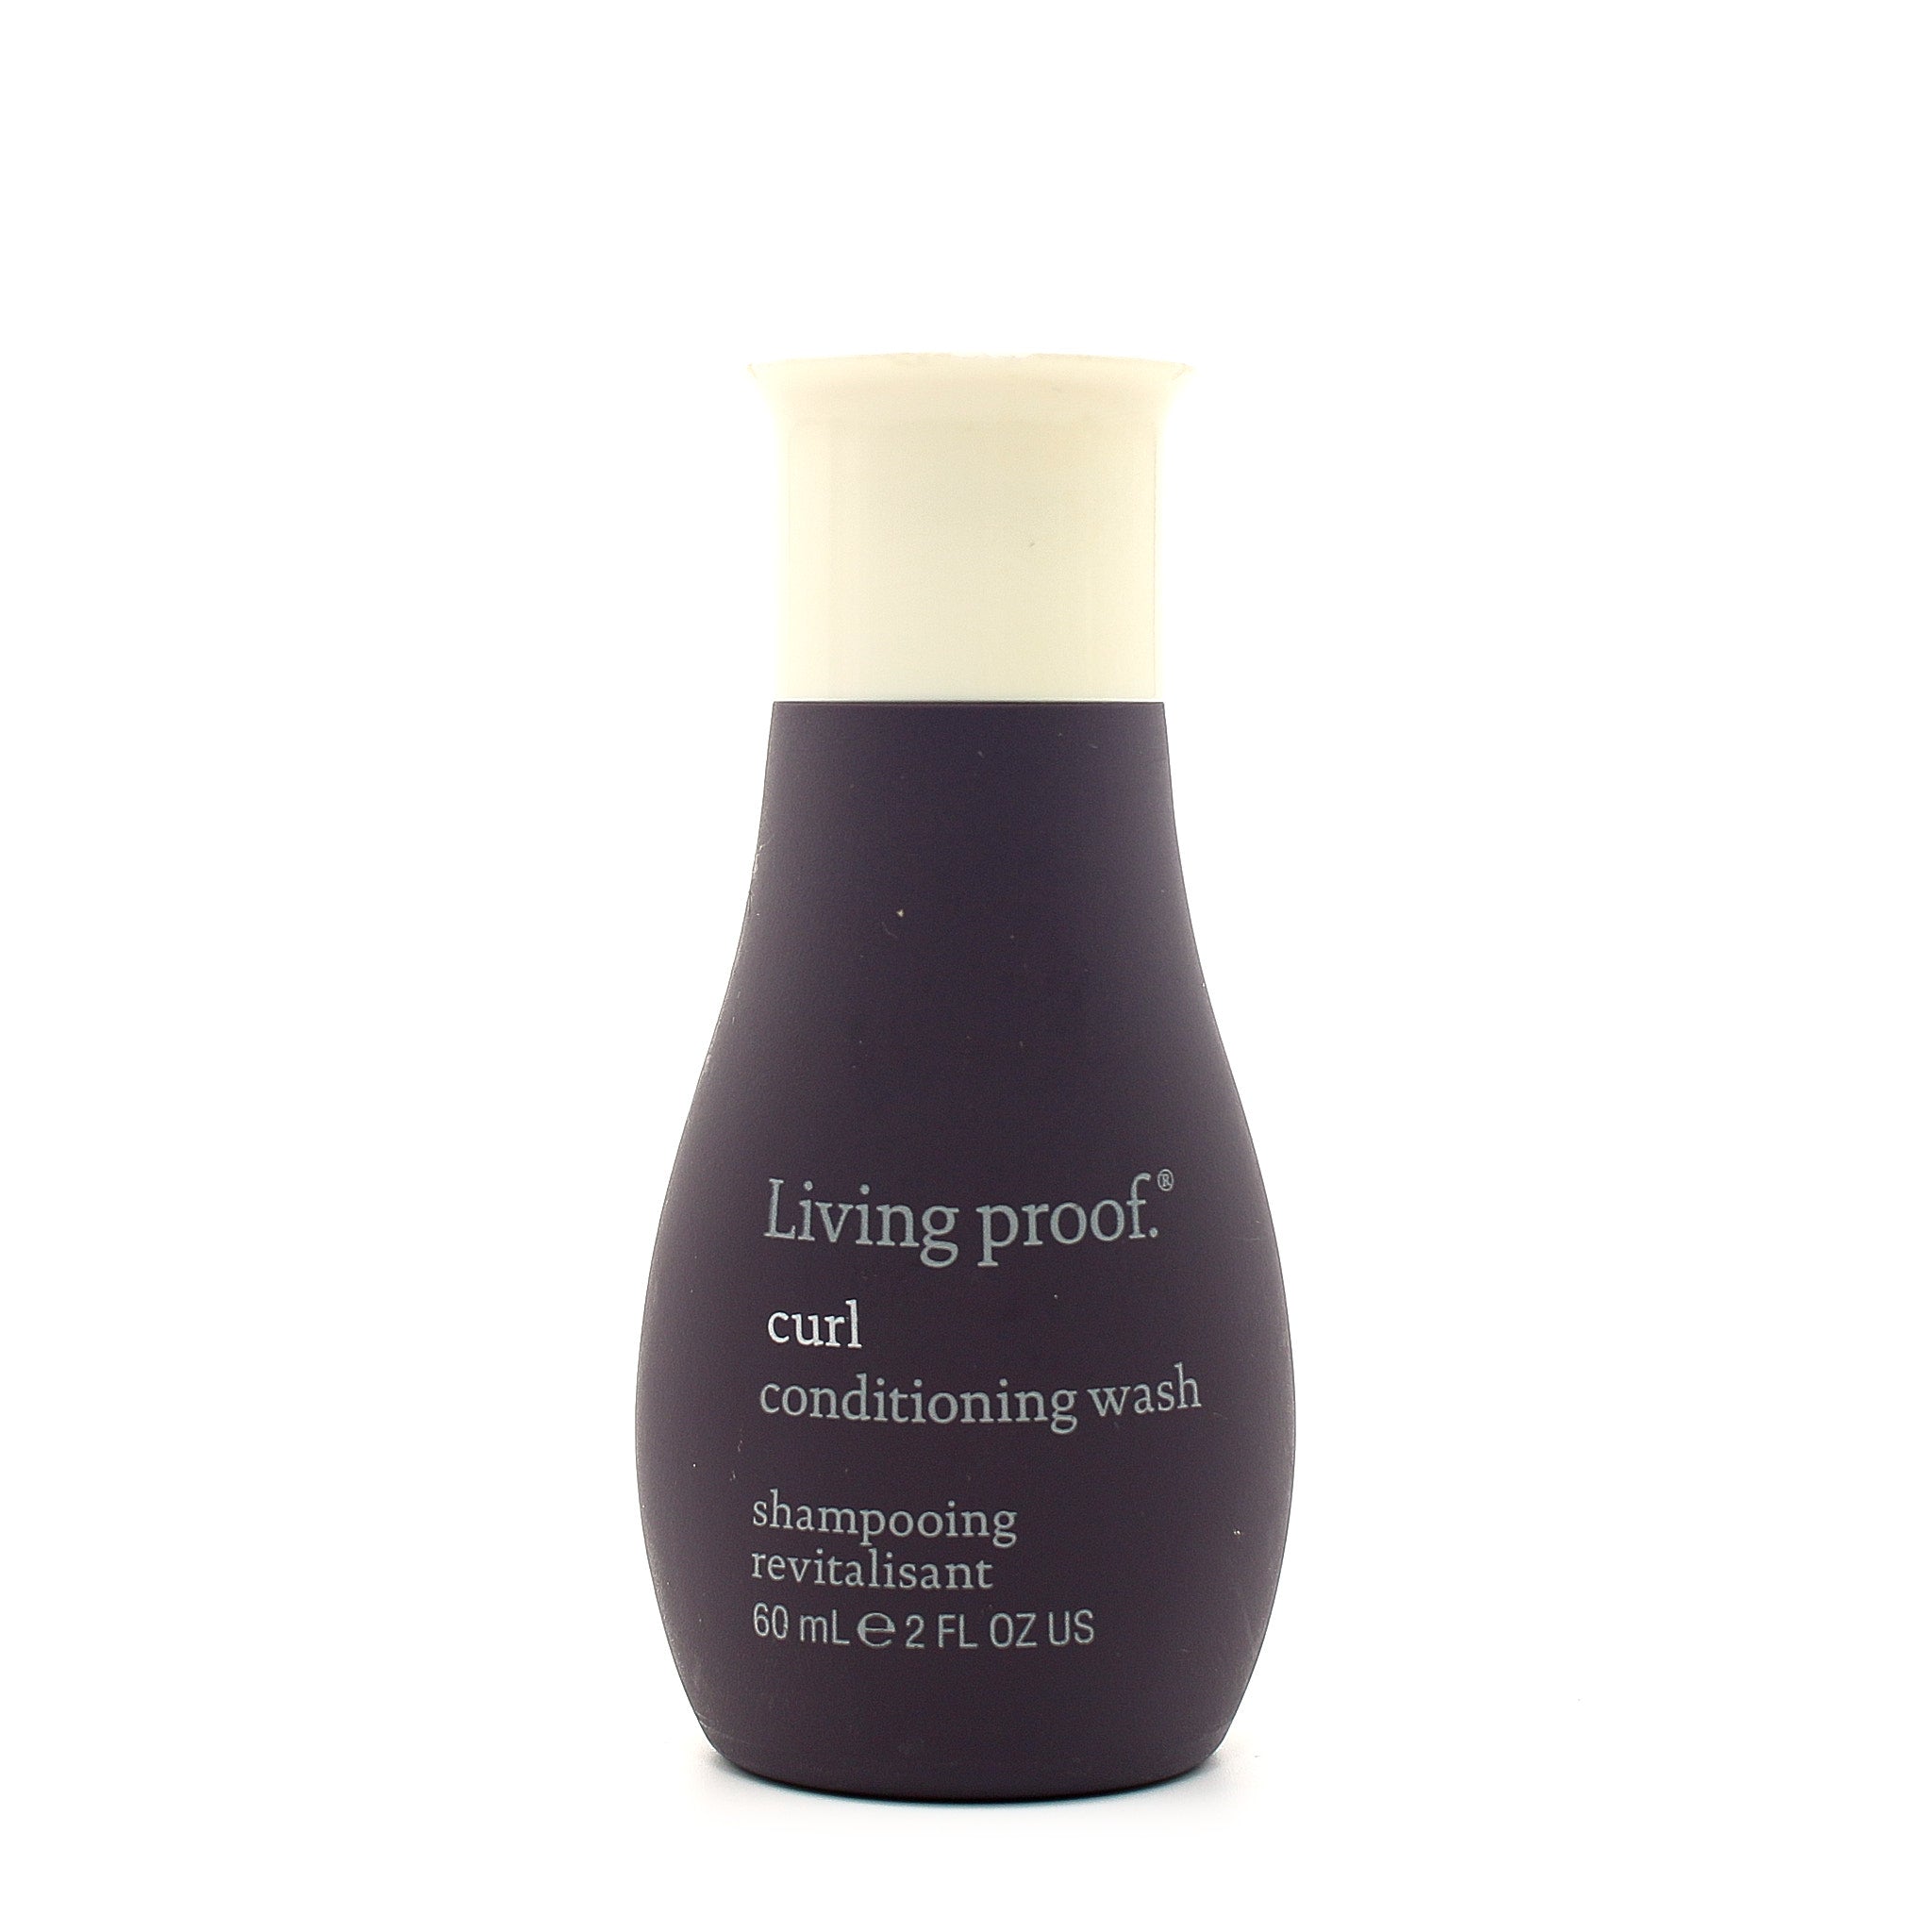 LIVING PROOF Curl Conditioning Wash Shampoo 2 oz